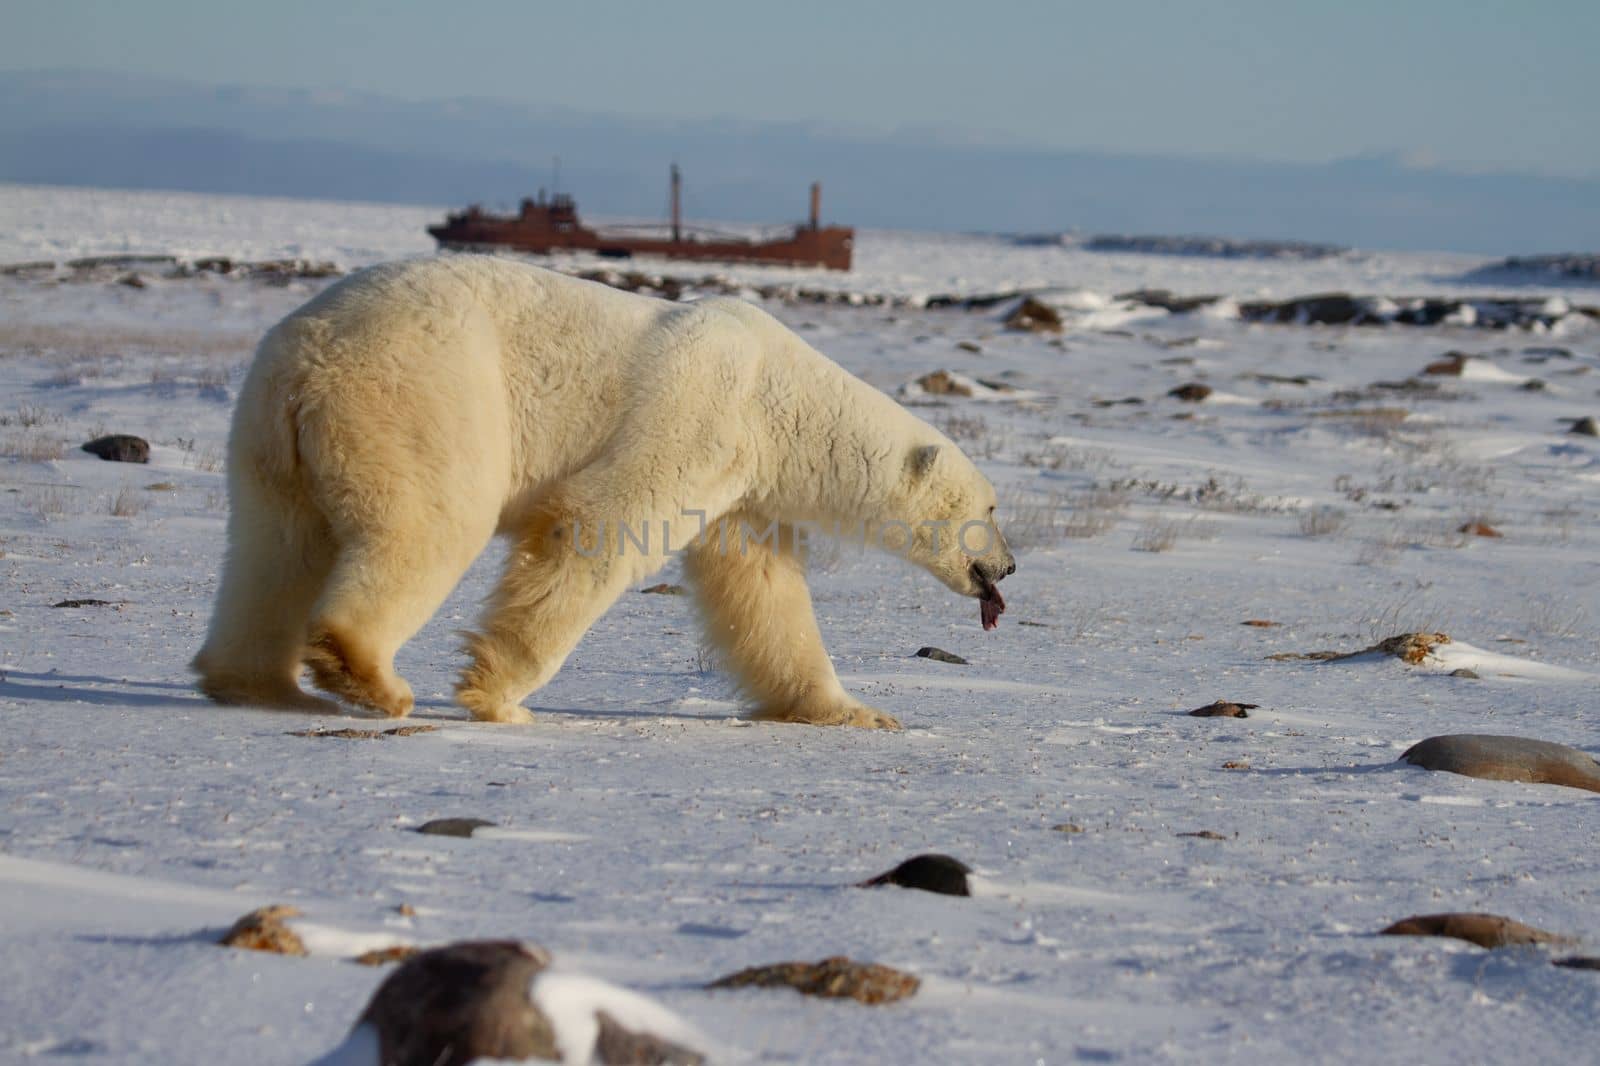 A polar bear, Ursus maritumis, sticking out its tongue while walking on snow among rocks with a shipwreck in the background by Granchinho